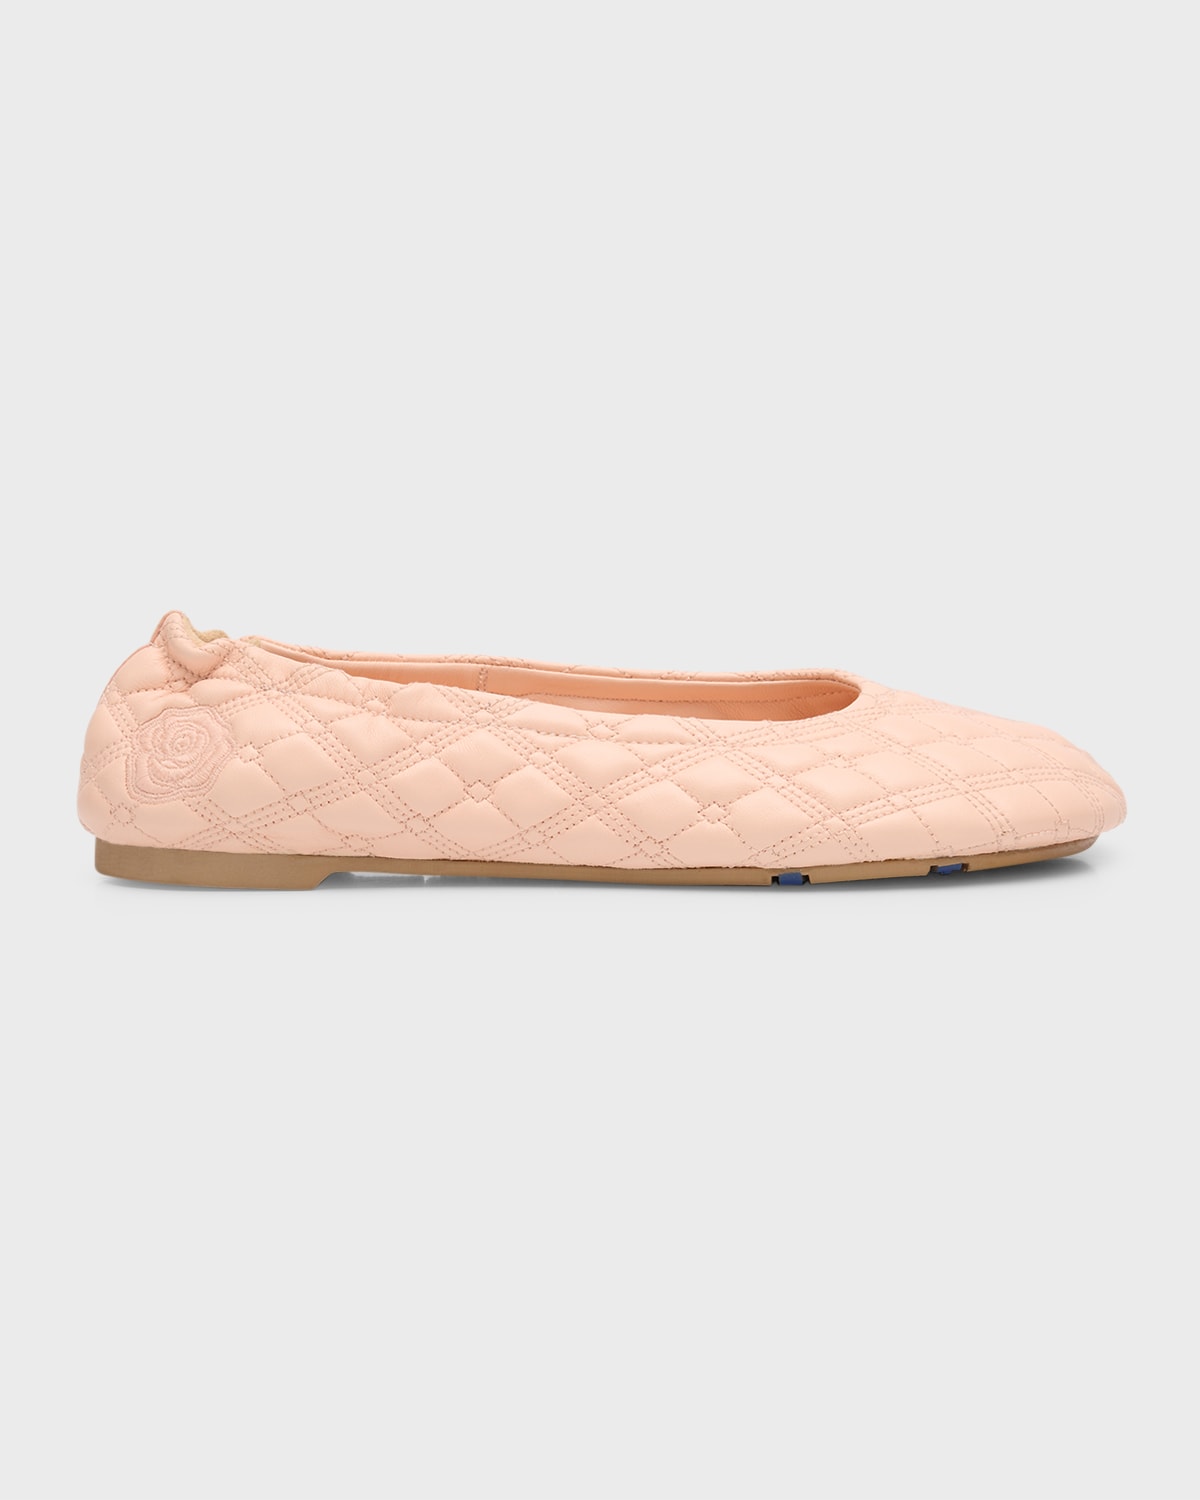 Burberry Sadler Quilted Lambskin Ballerina Flats In Cameo